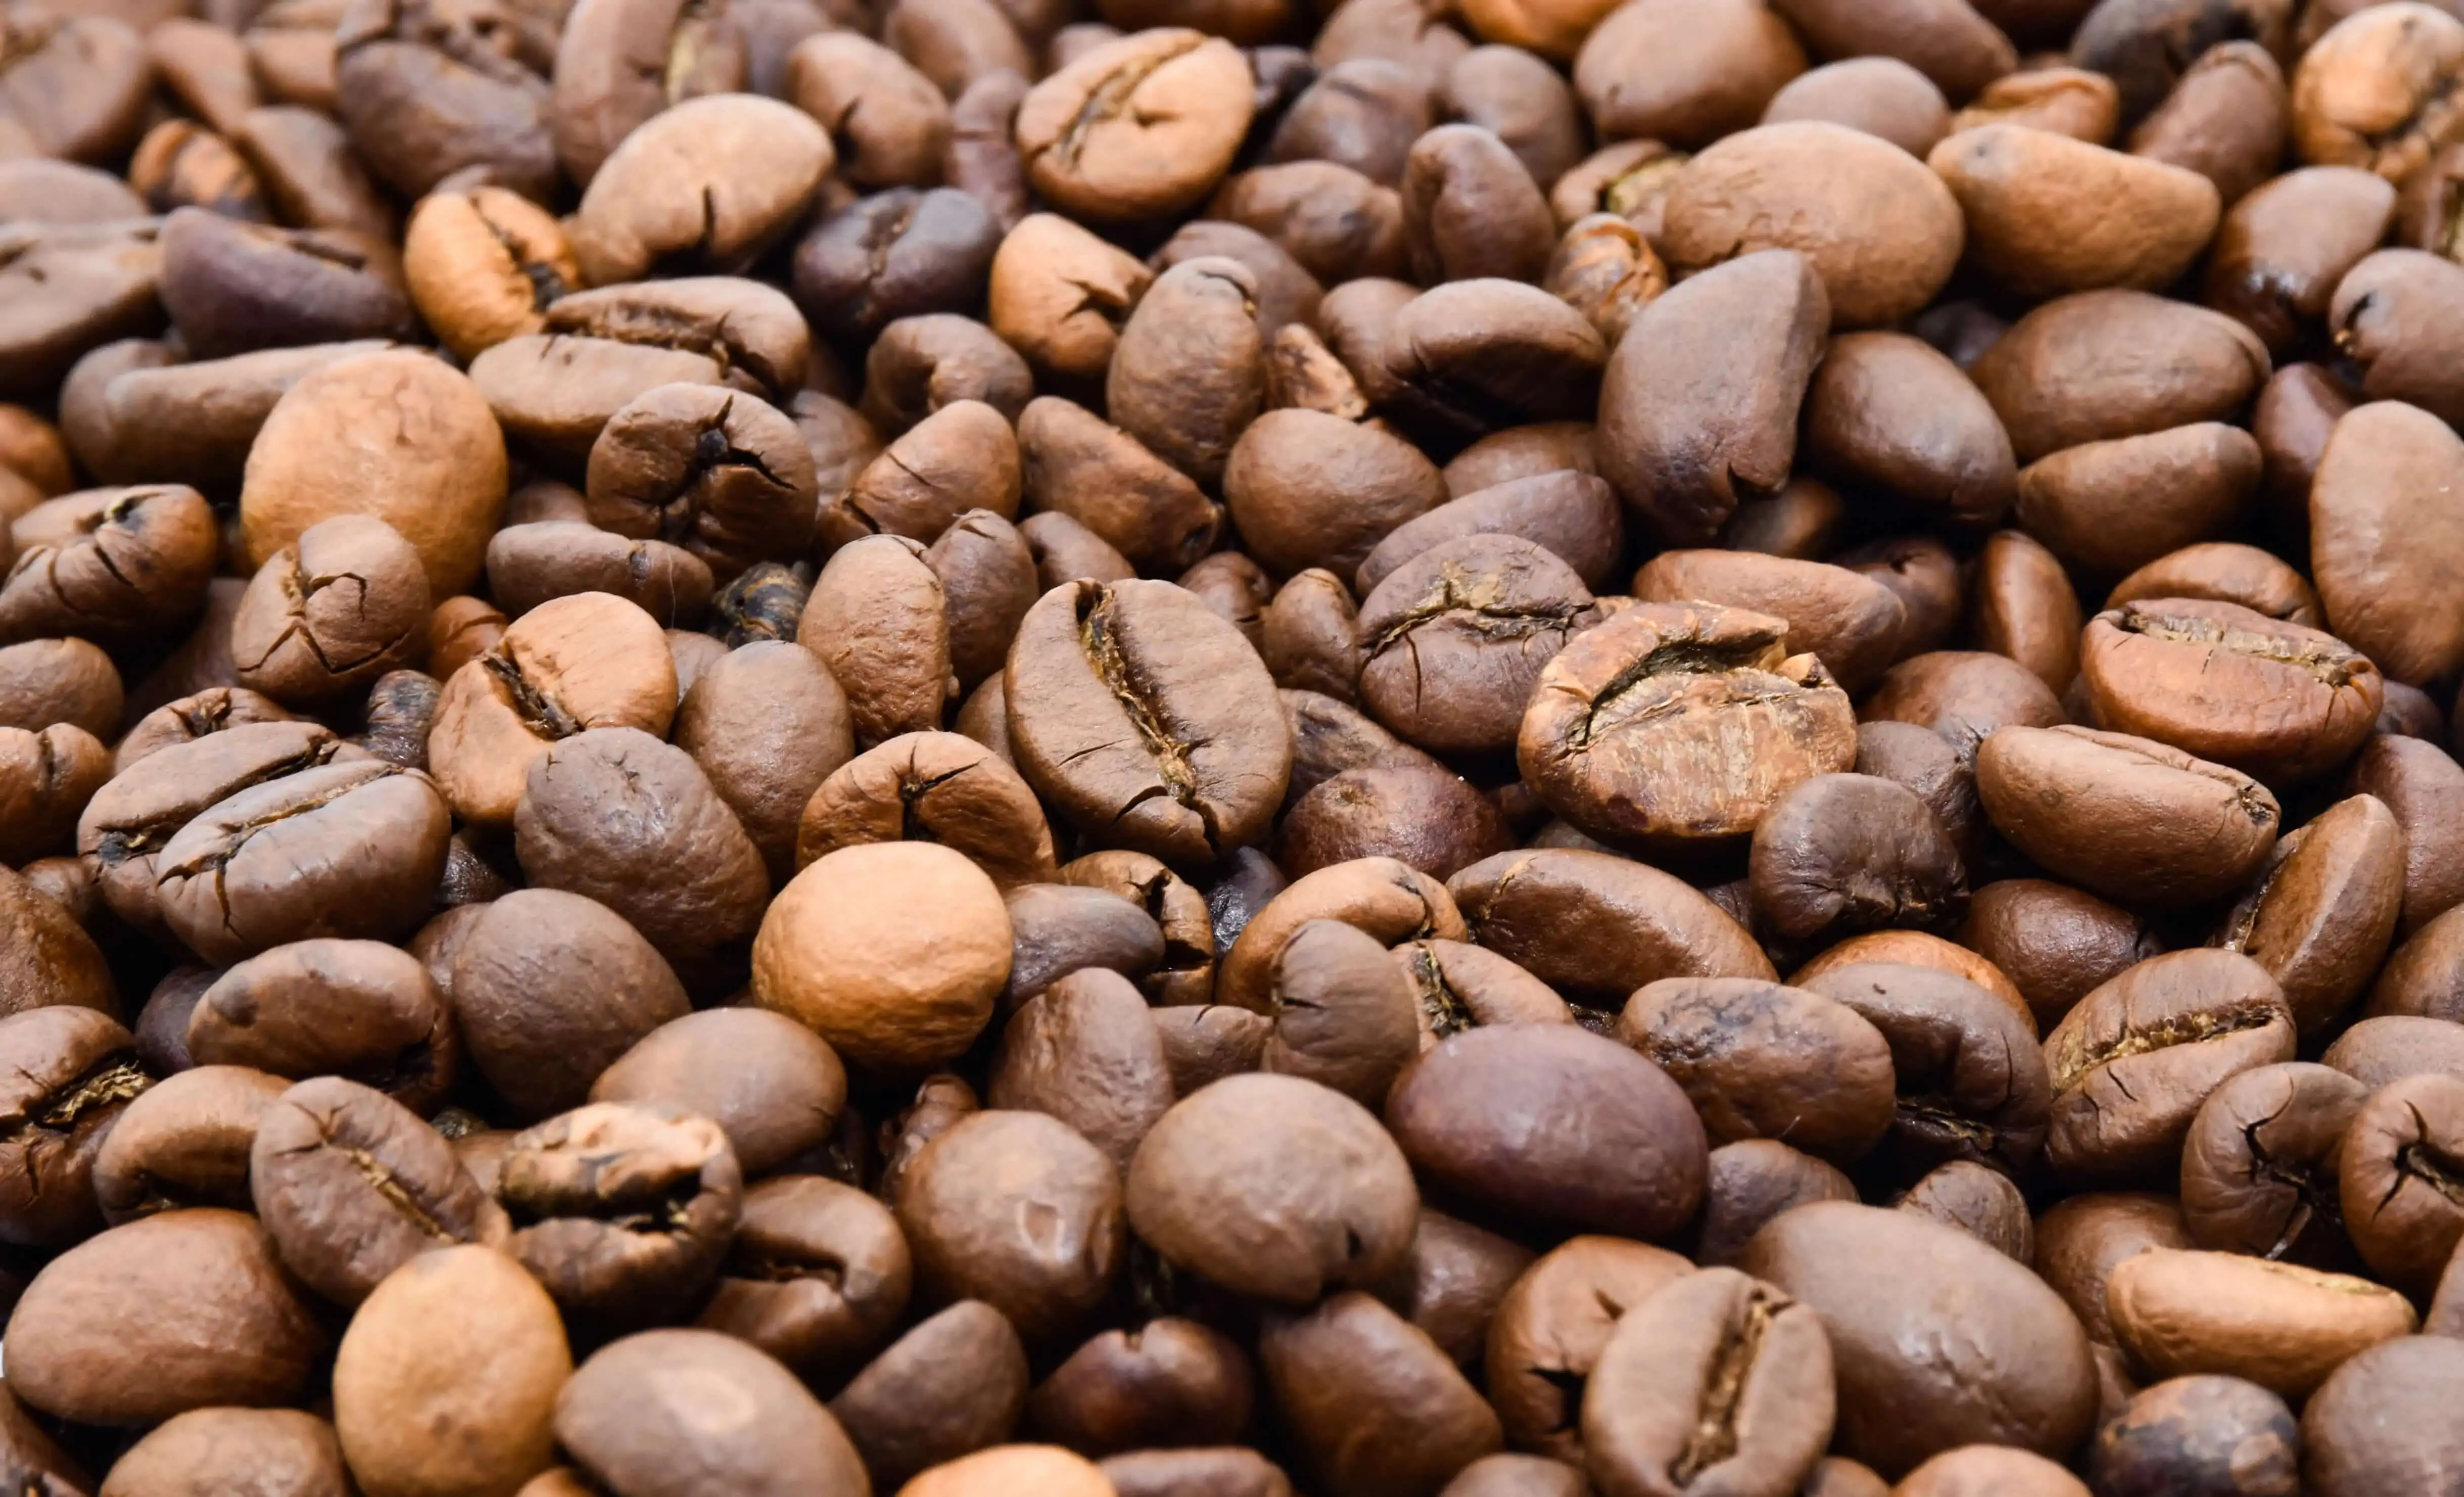 Medium Roasted Coffee Beans-Coffeo Couch